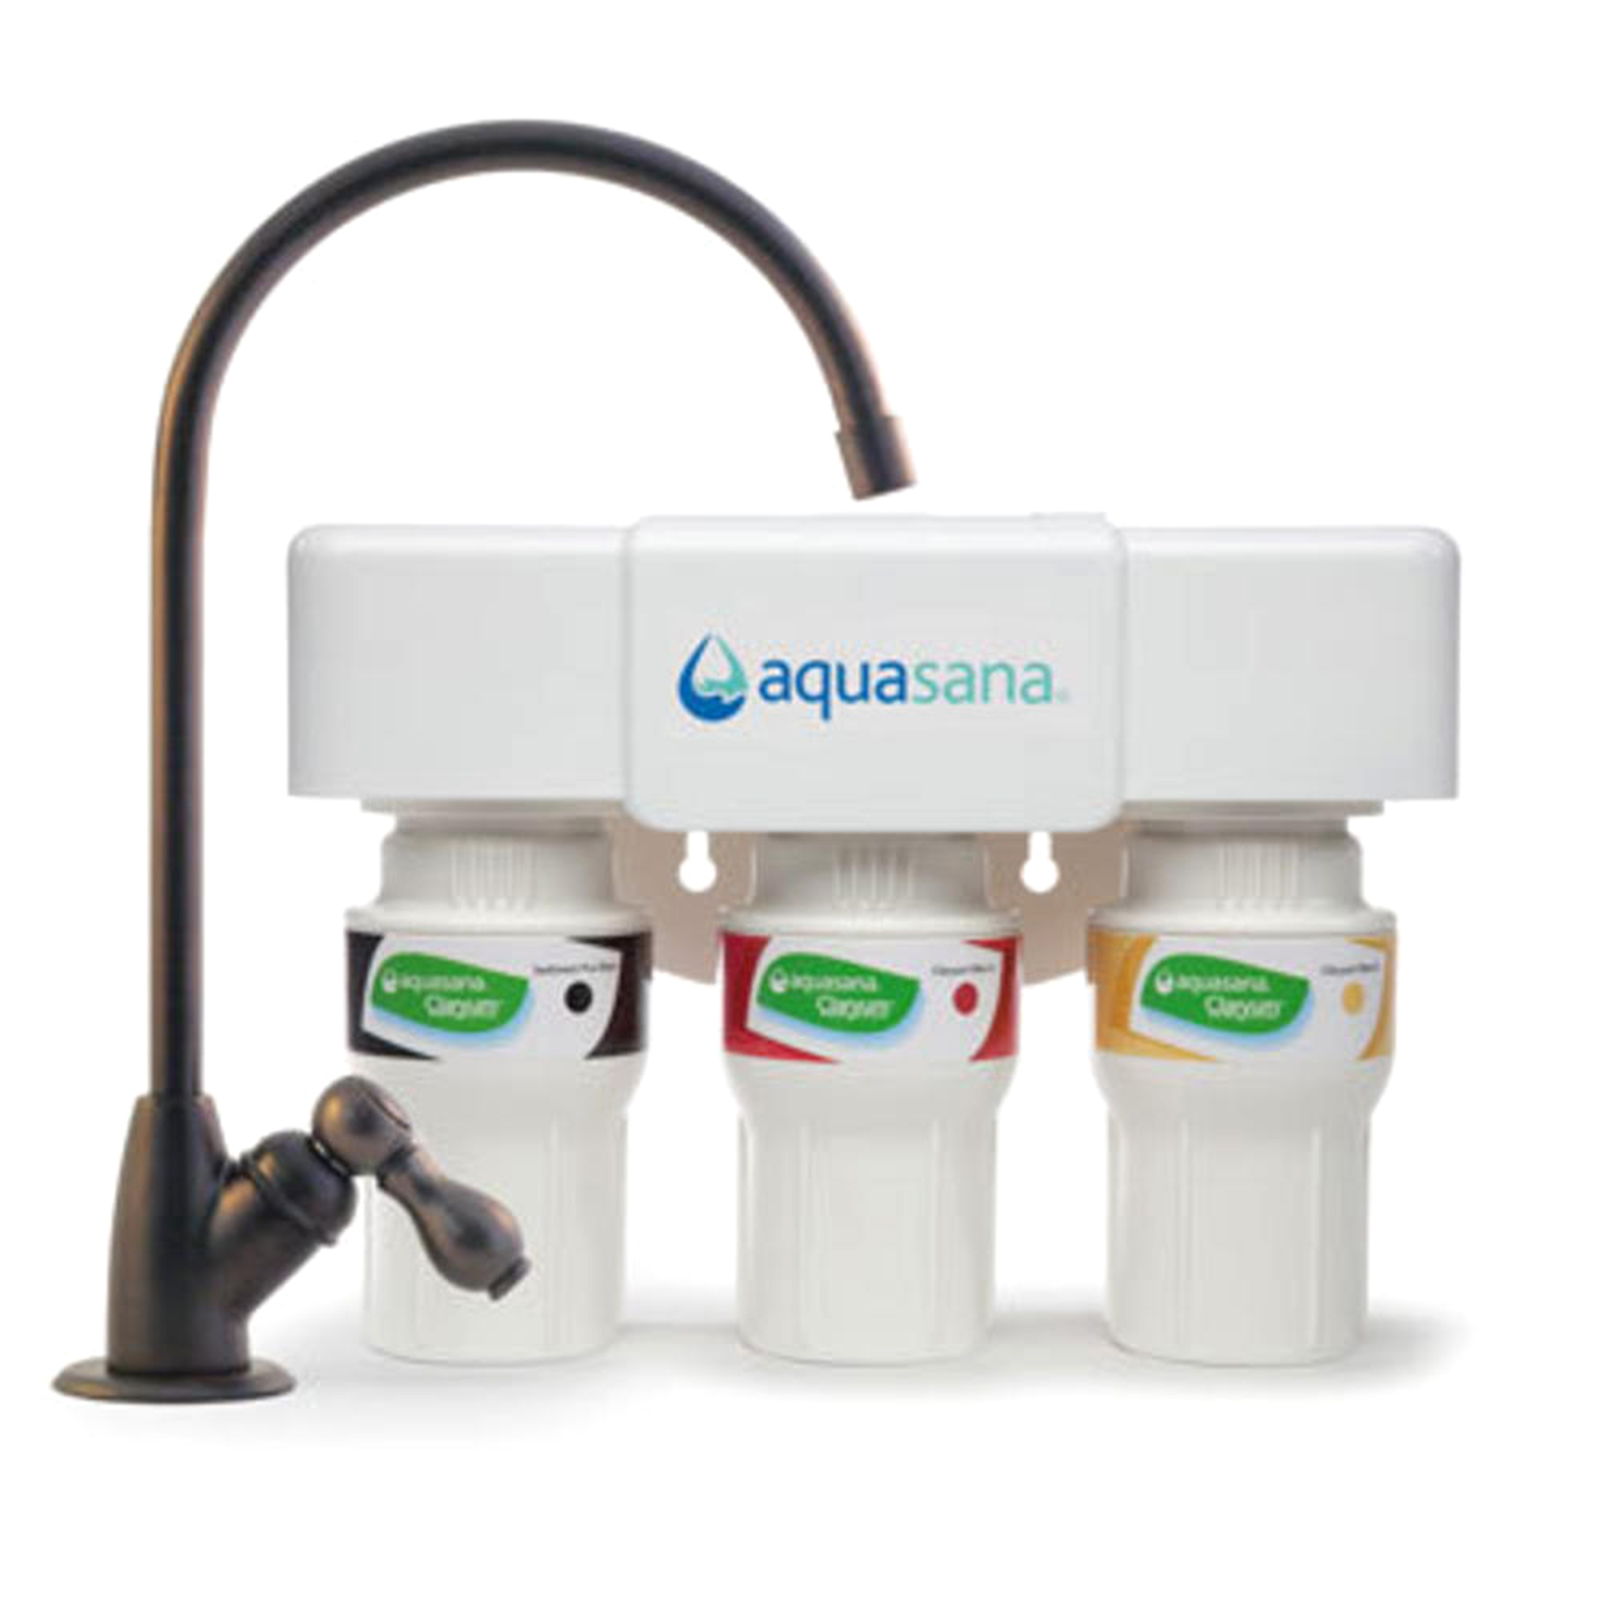 Aquasana AQ-5300.62 600gal 3-Stage Under Sink Water Filter System with Oil-Rubbed Bronze Faucet